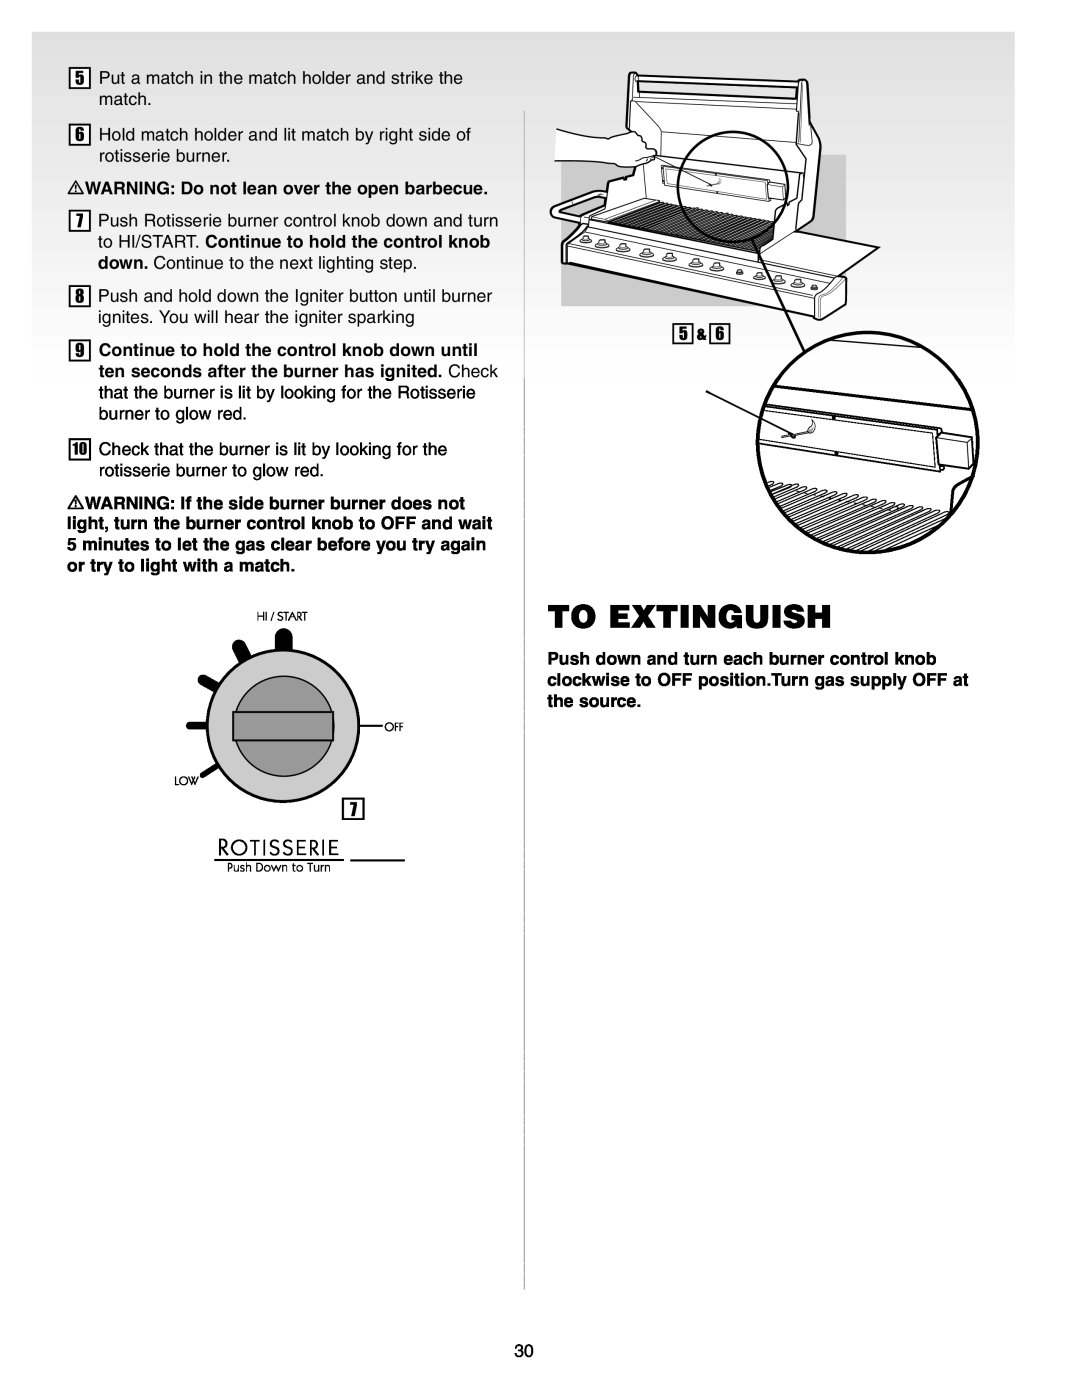 Weber Gas Burner manual To Extinguish, WARNING Do not lean over the open barbecue 